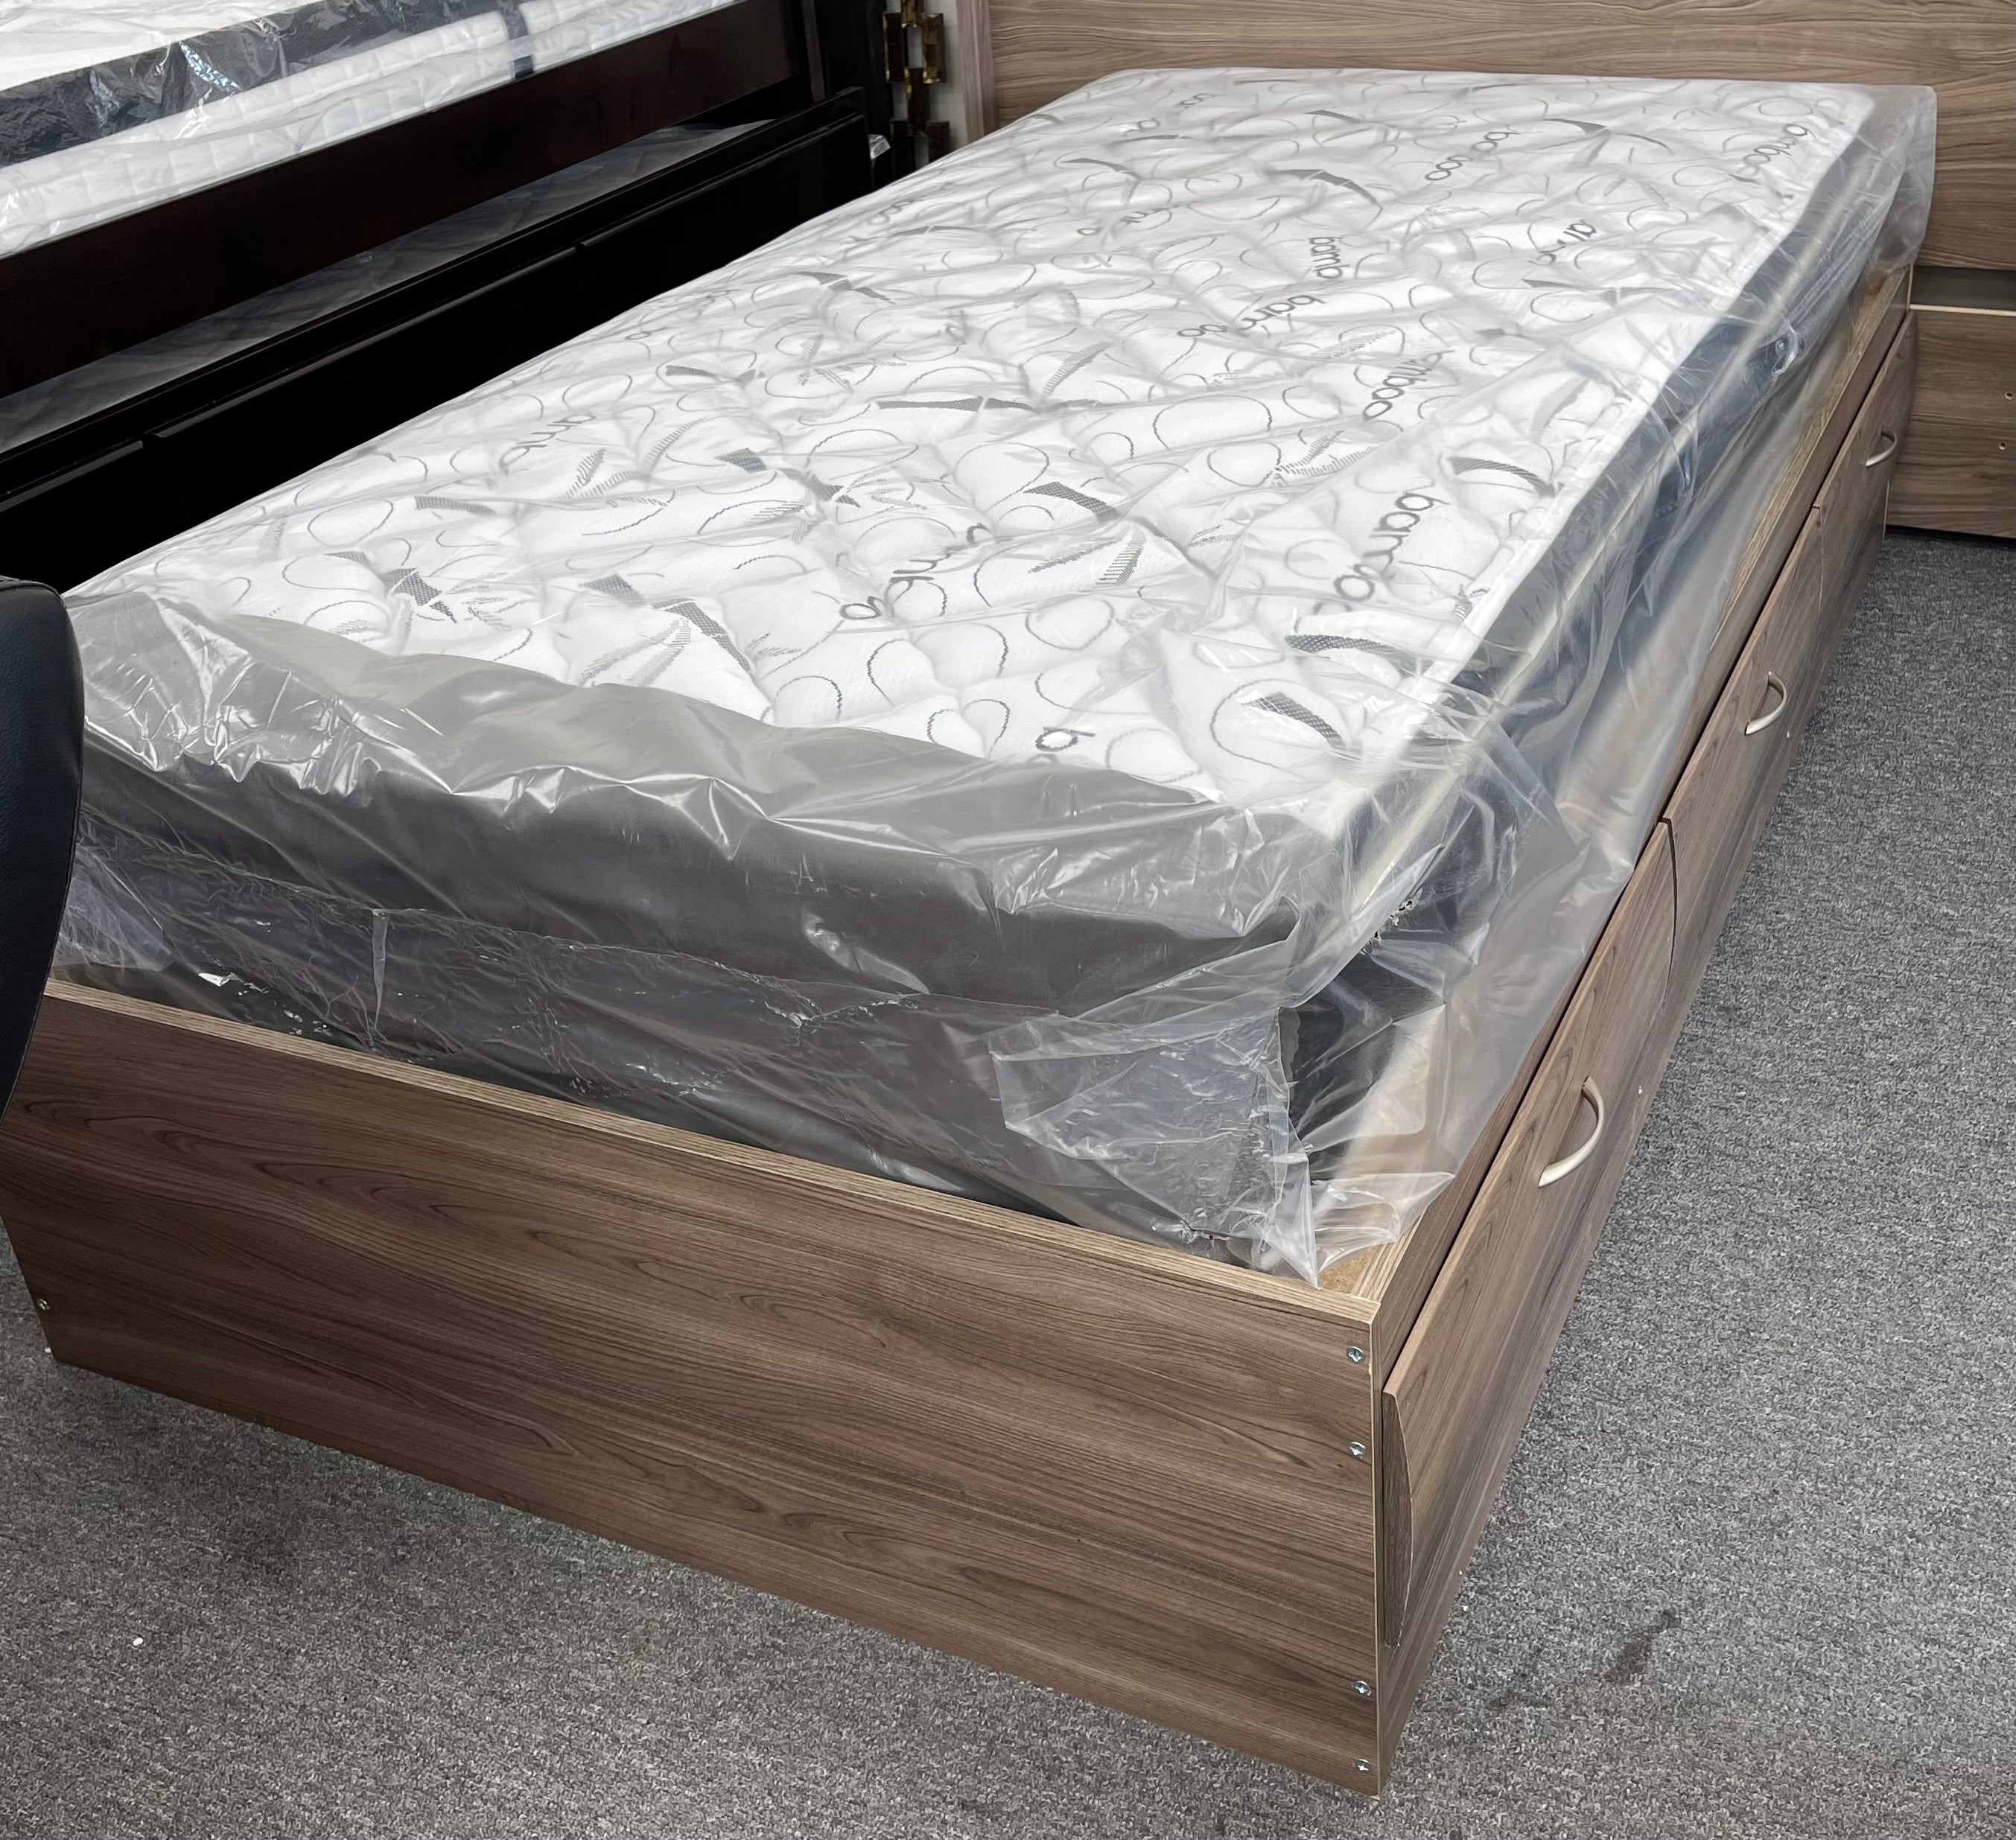 Excellence - Twin Mattress with Bamboo Quilted Cover - Made in Canada